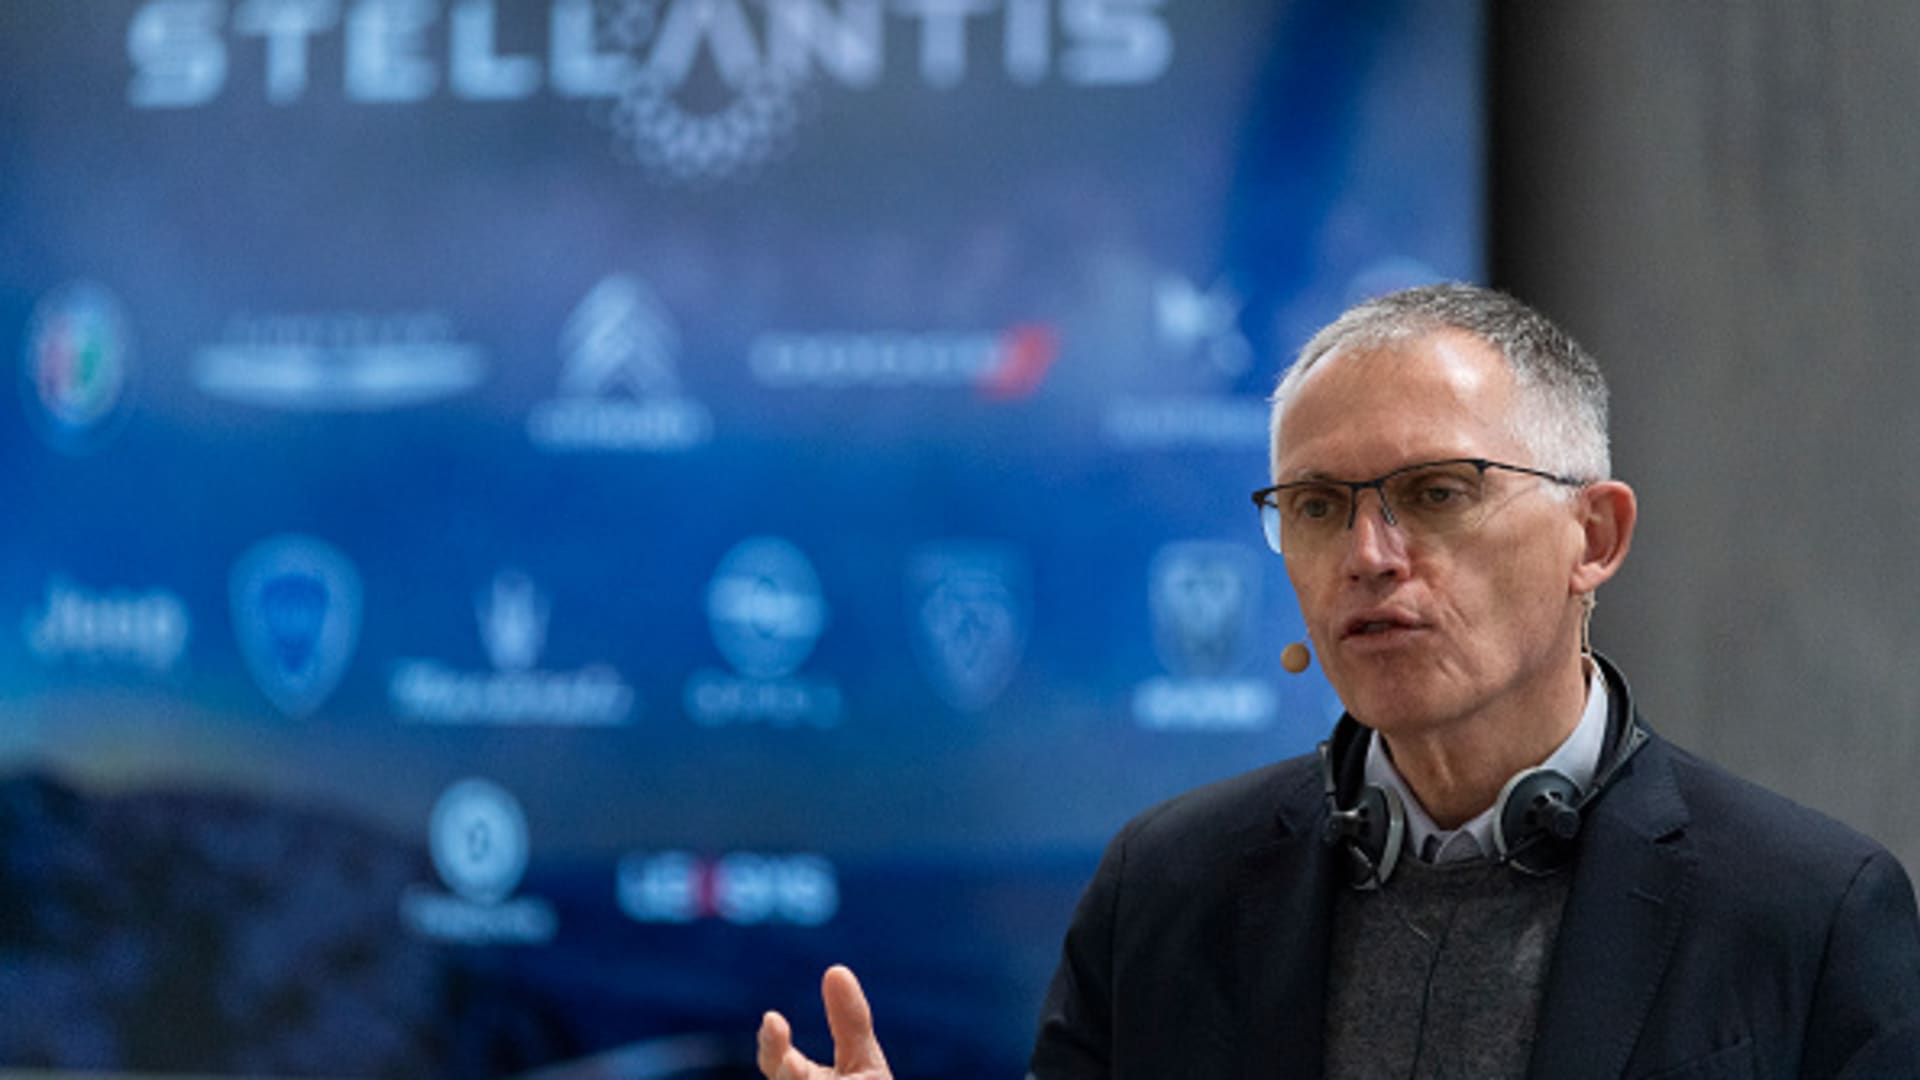 Stellantis CEO Carlos Tavares, photographed in Turin, Italy, on March 31, 2022.